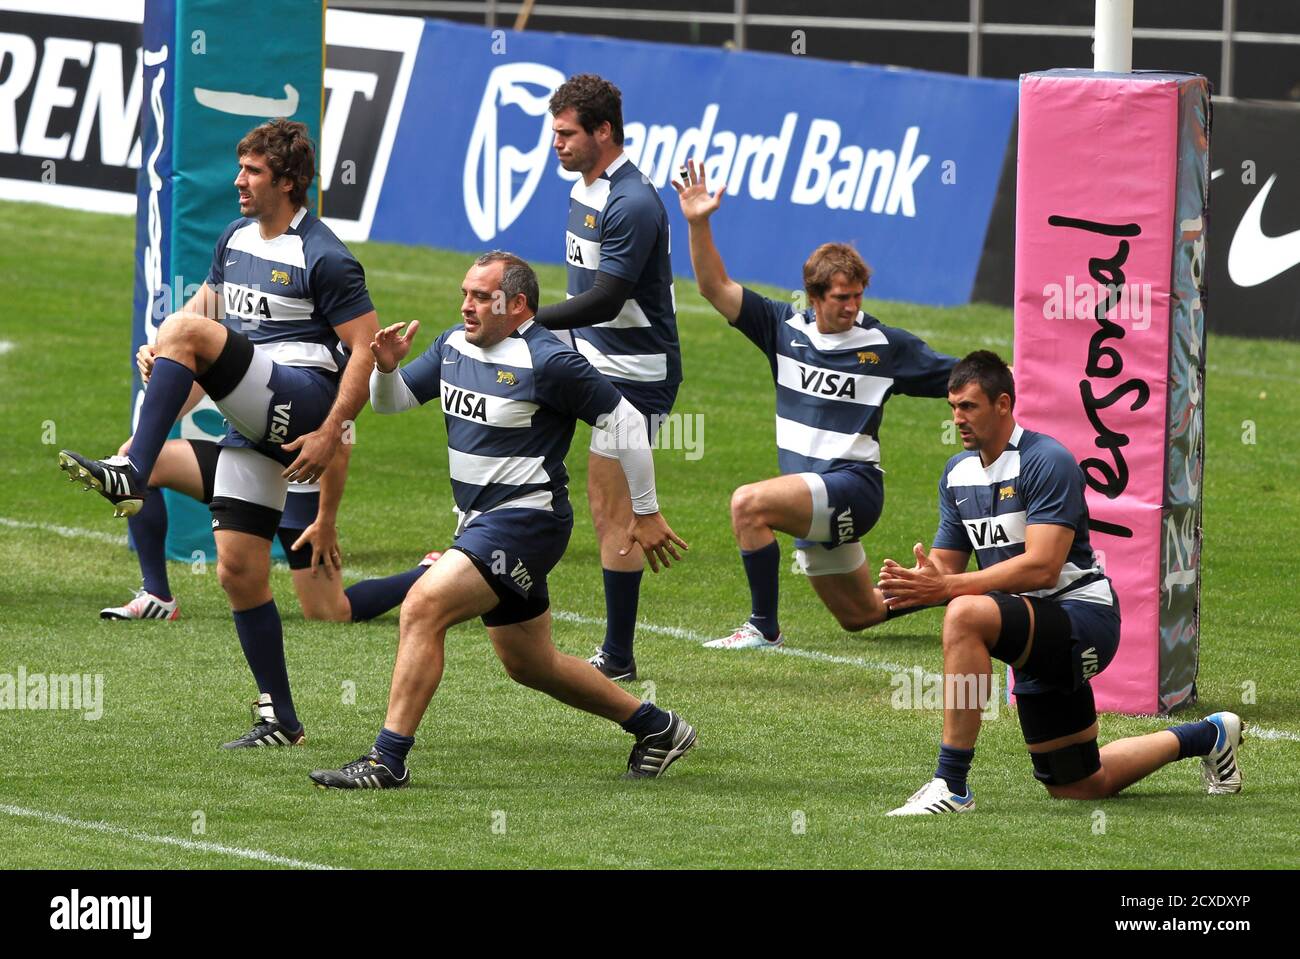 Players of Argentina's Los Pumas rugby team warm up before a practice  session at the Estadio Unico in La Plata September 28, 2012. Argentina's  Los Pumas will clash with New Zealand's All